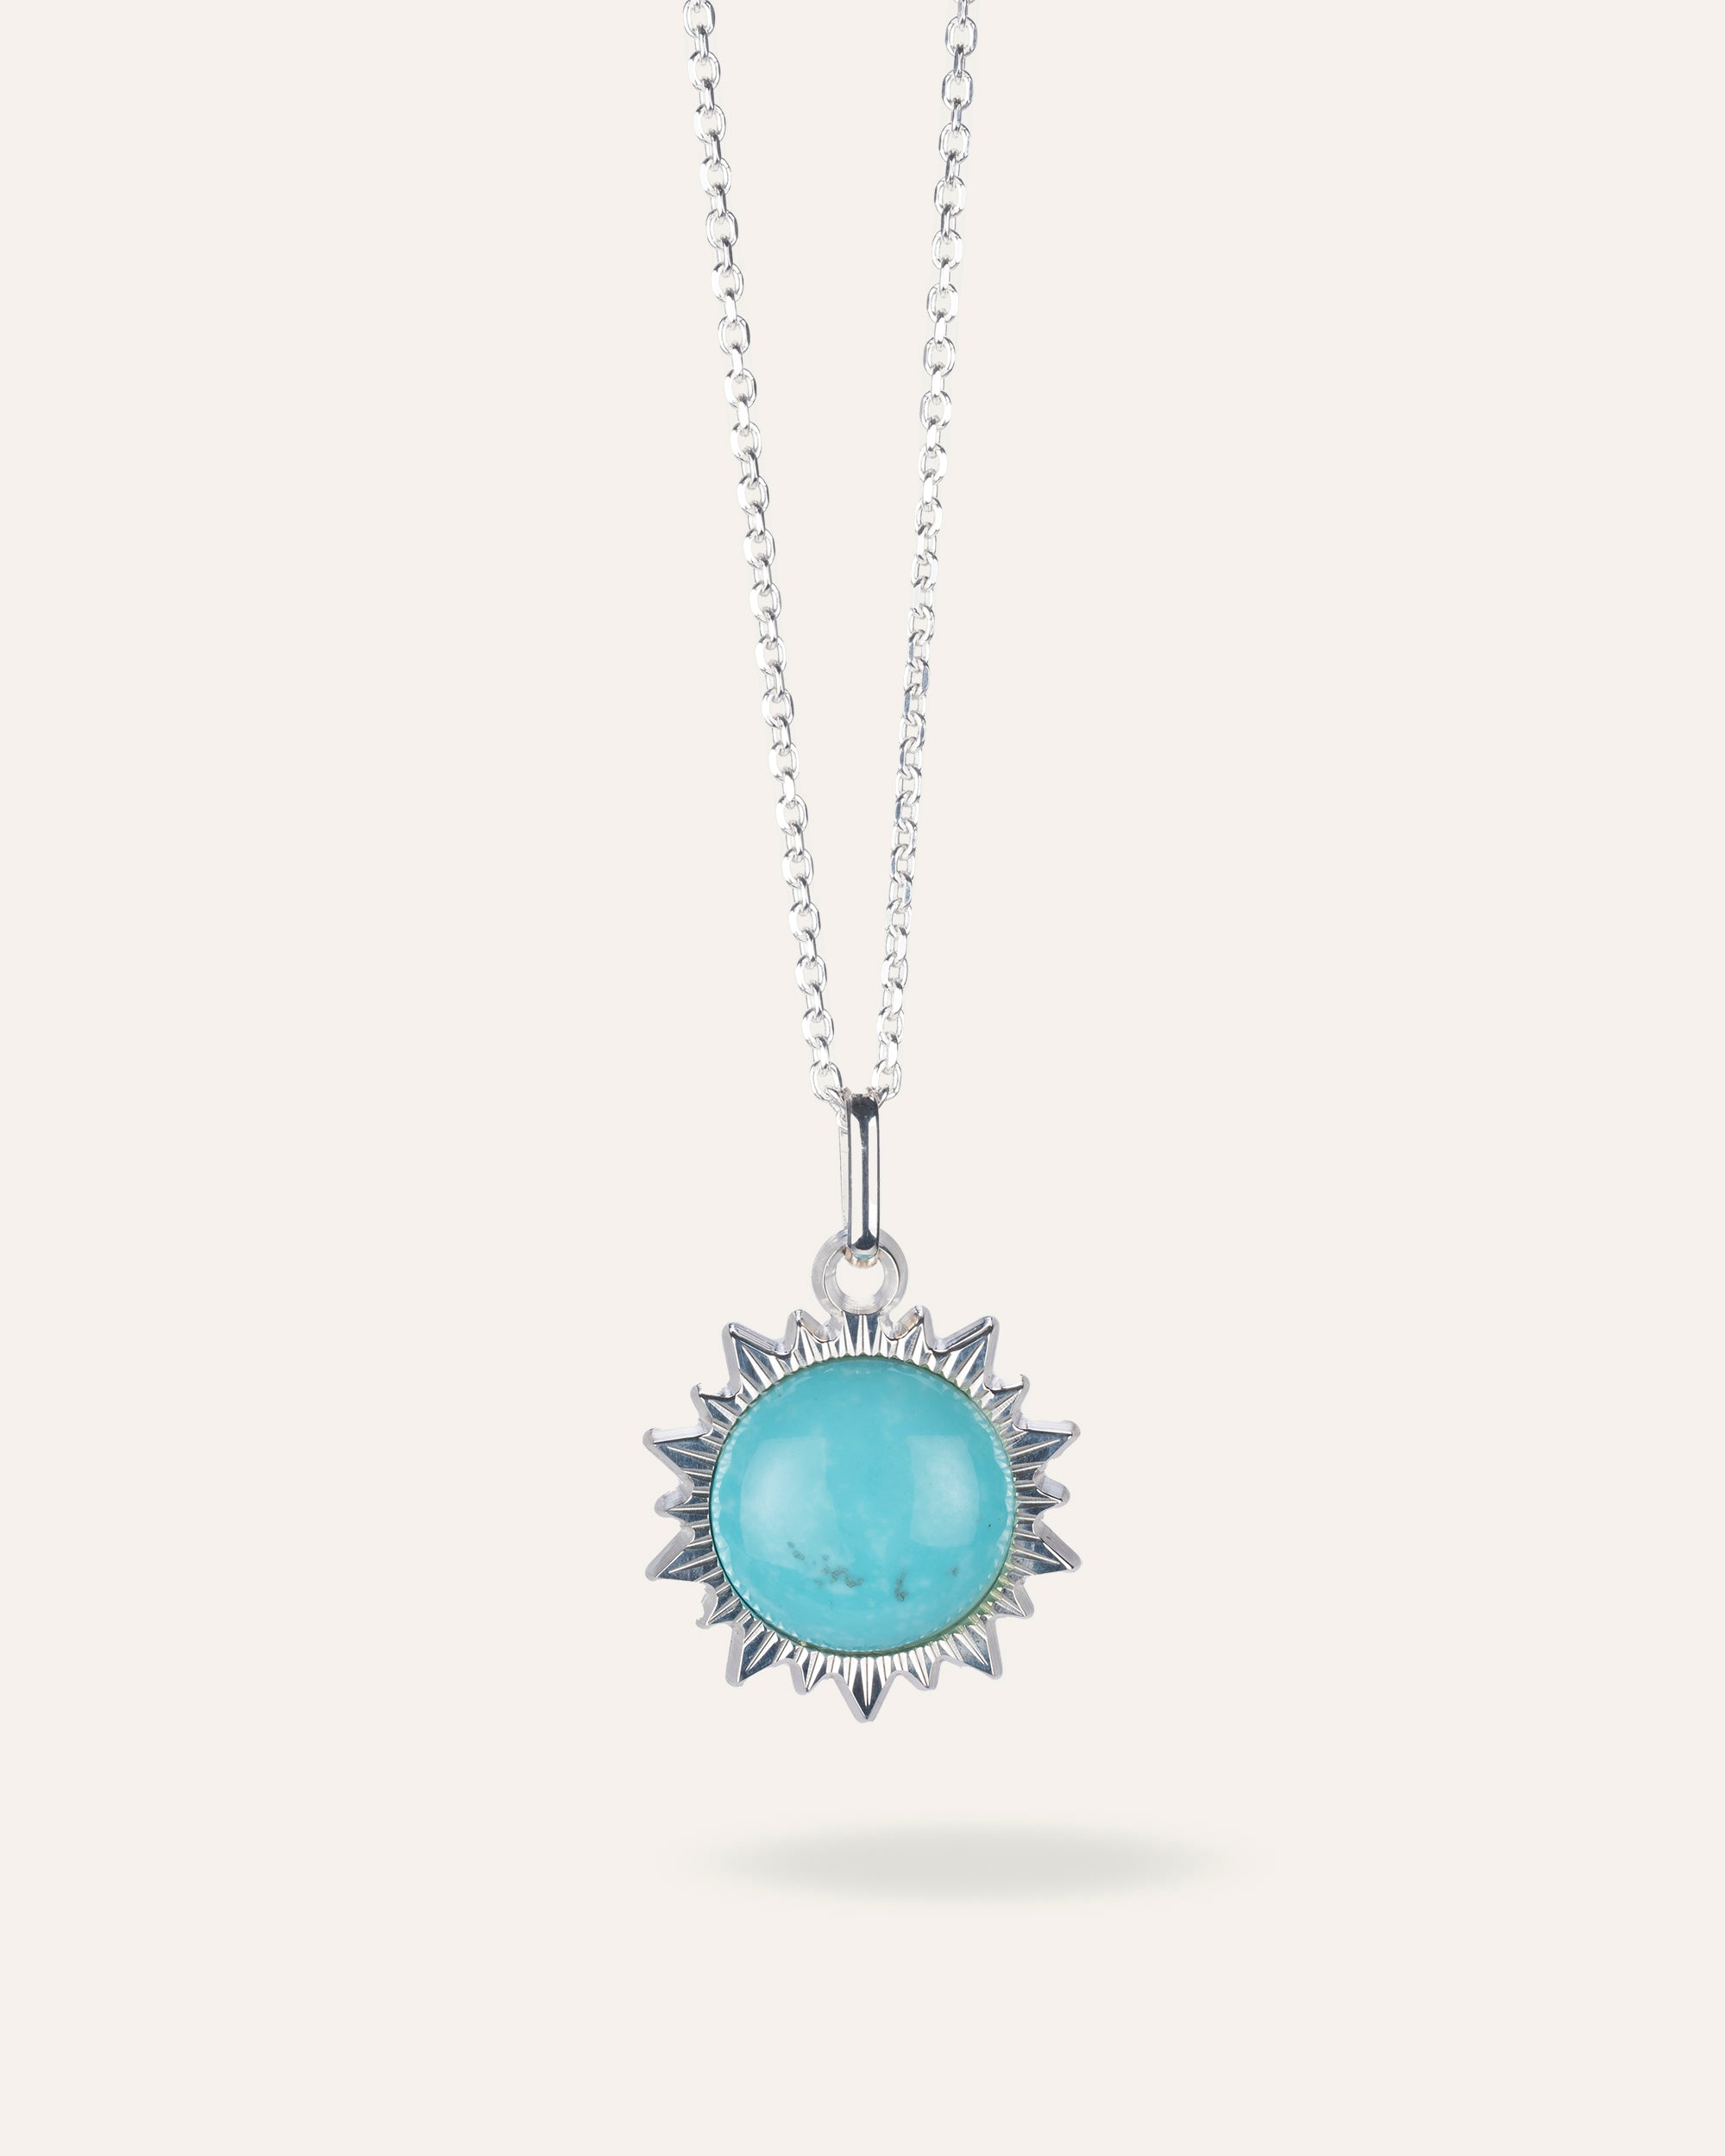 Silver and turquoise sun necklace